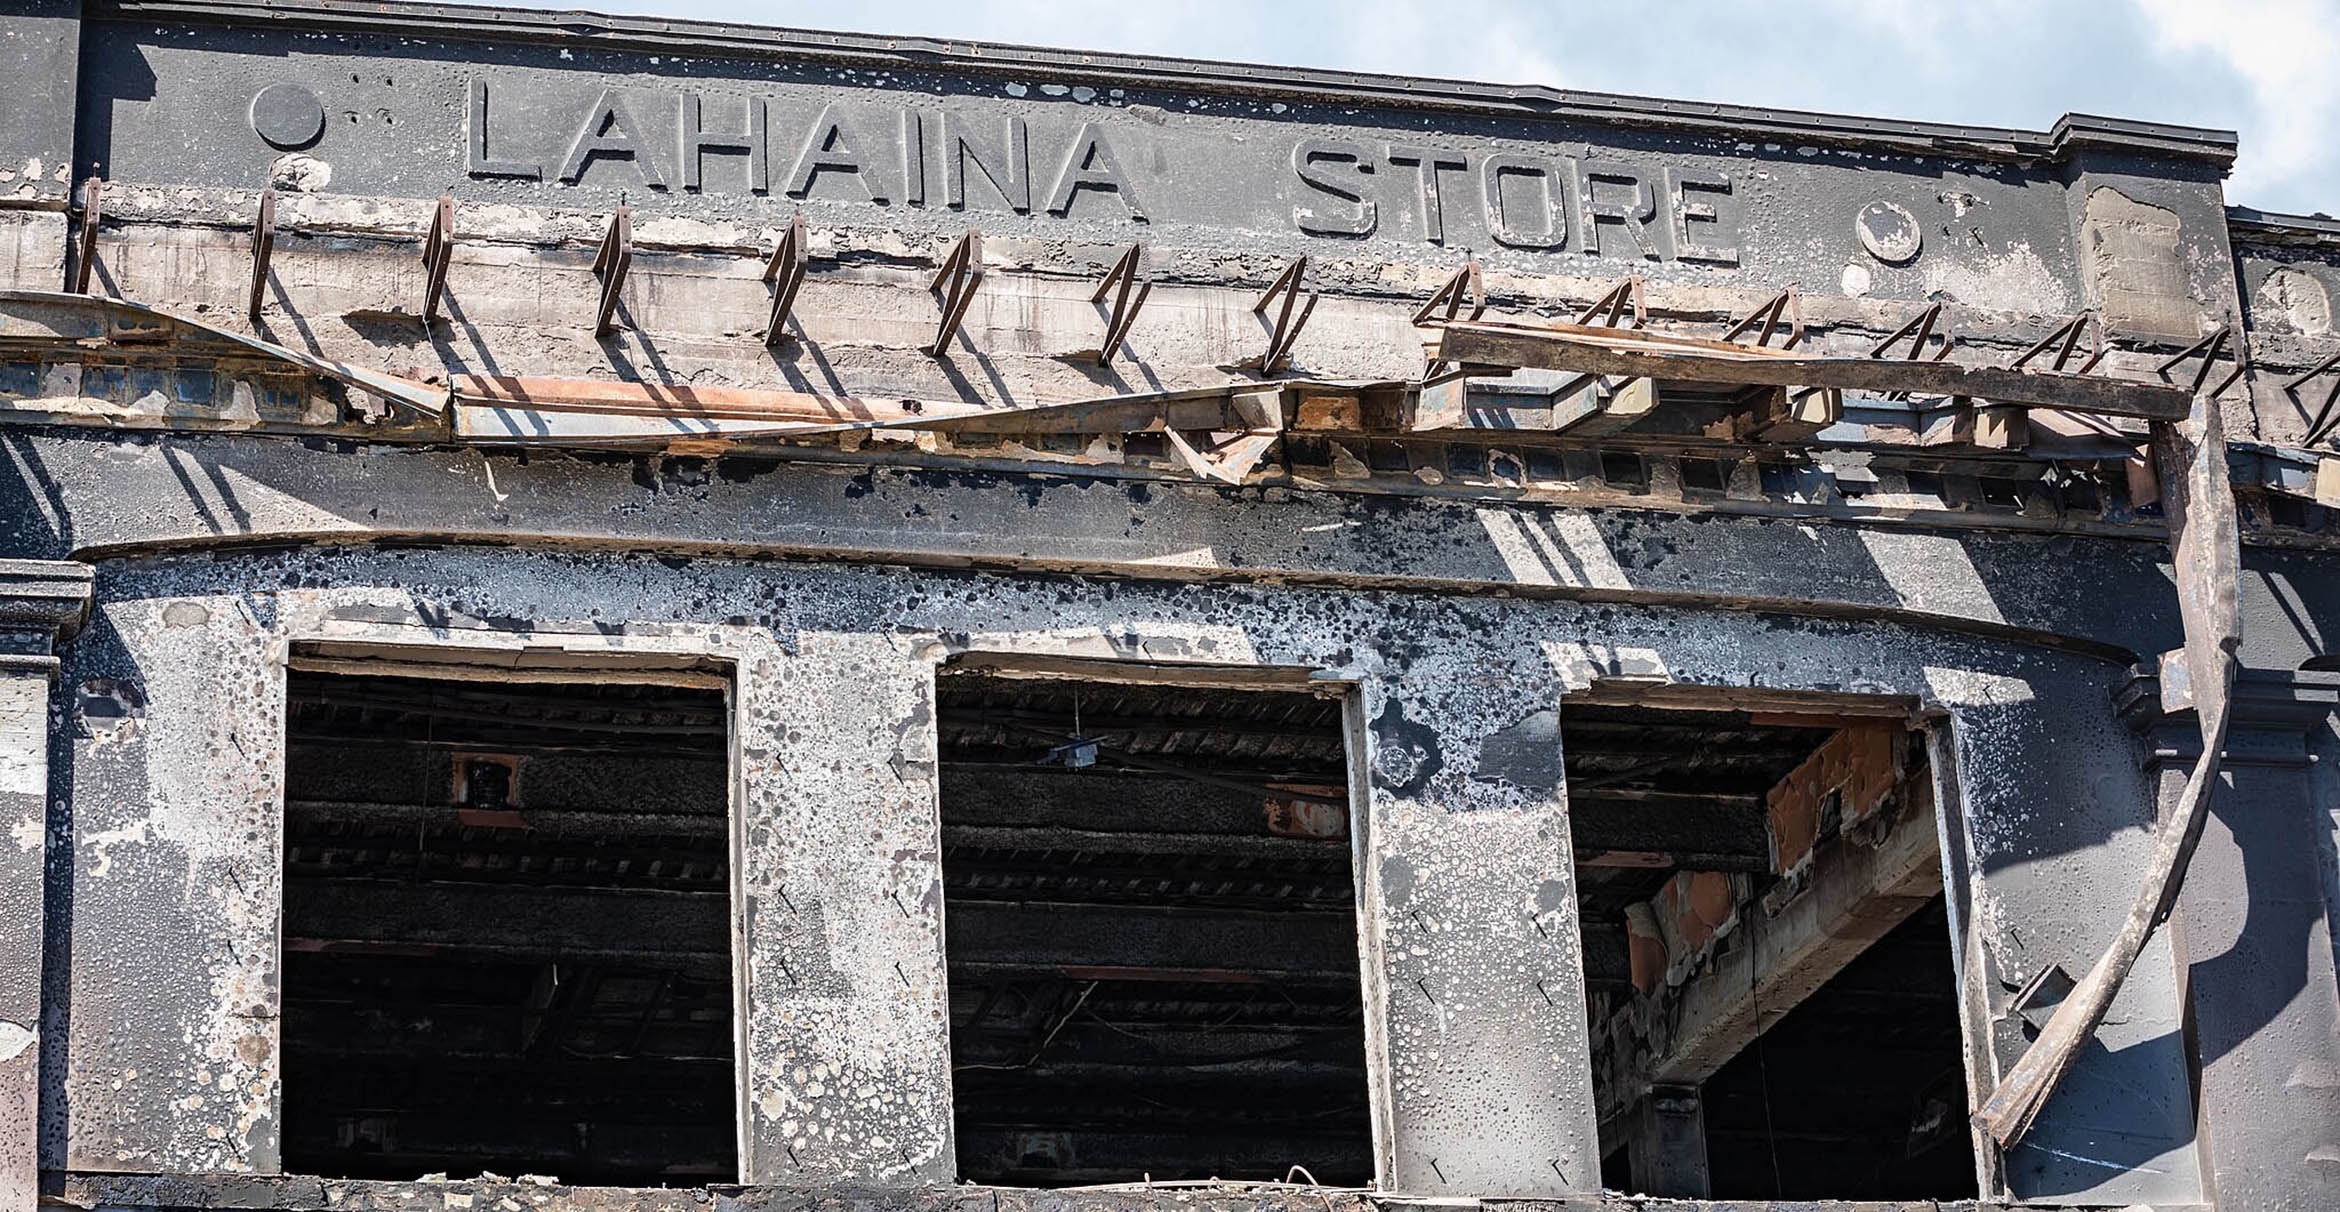 Picture of the burned building of the Lahaina Store in Maui.